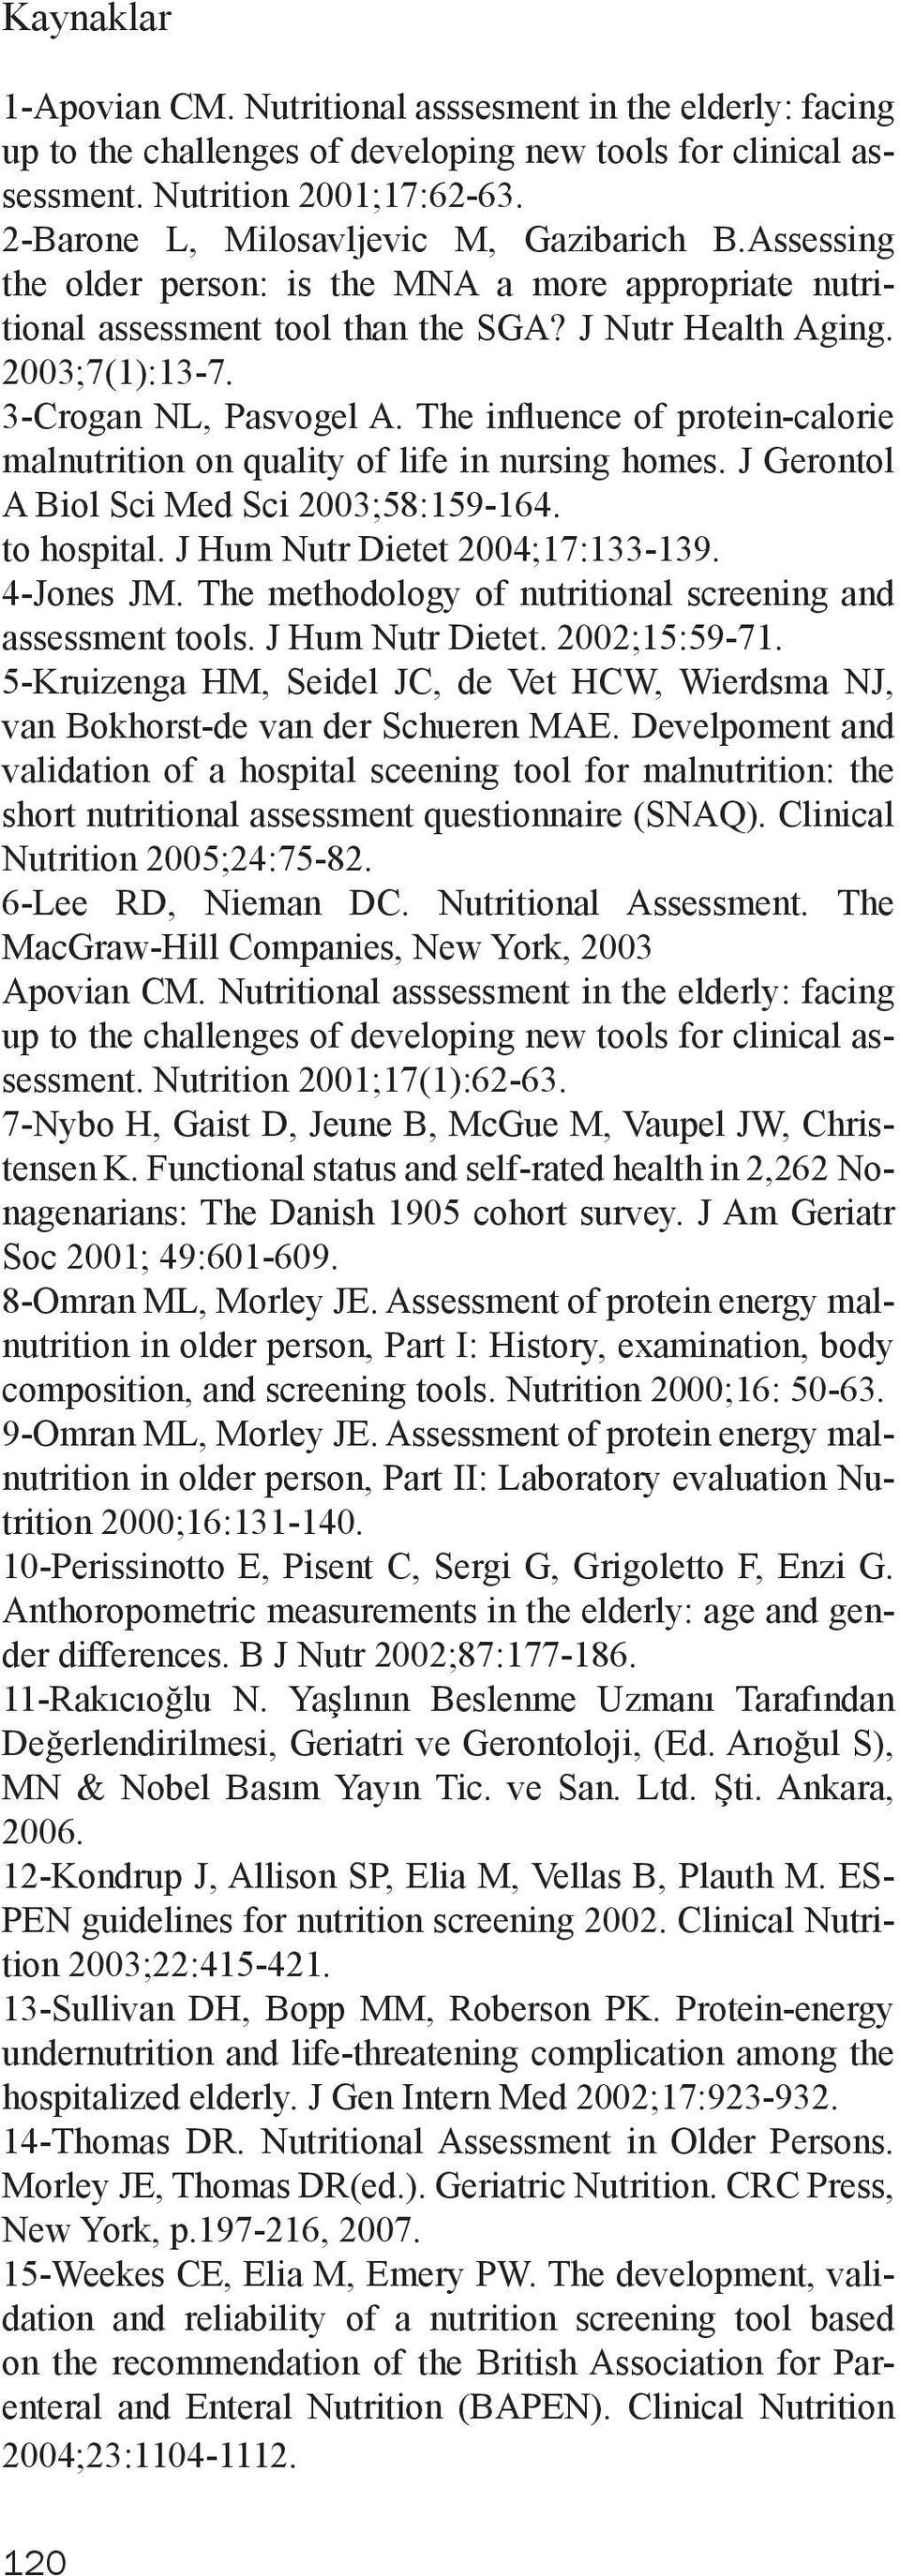 3-Crogan NL, Pasvogel A. The influence of protein-calorie malnutrition on quality of life in nursing homes. J Gerontol A Biol Sci Med Sci 2003;58:159-164. to hospital.